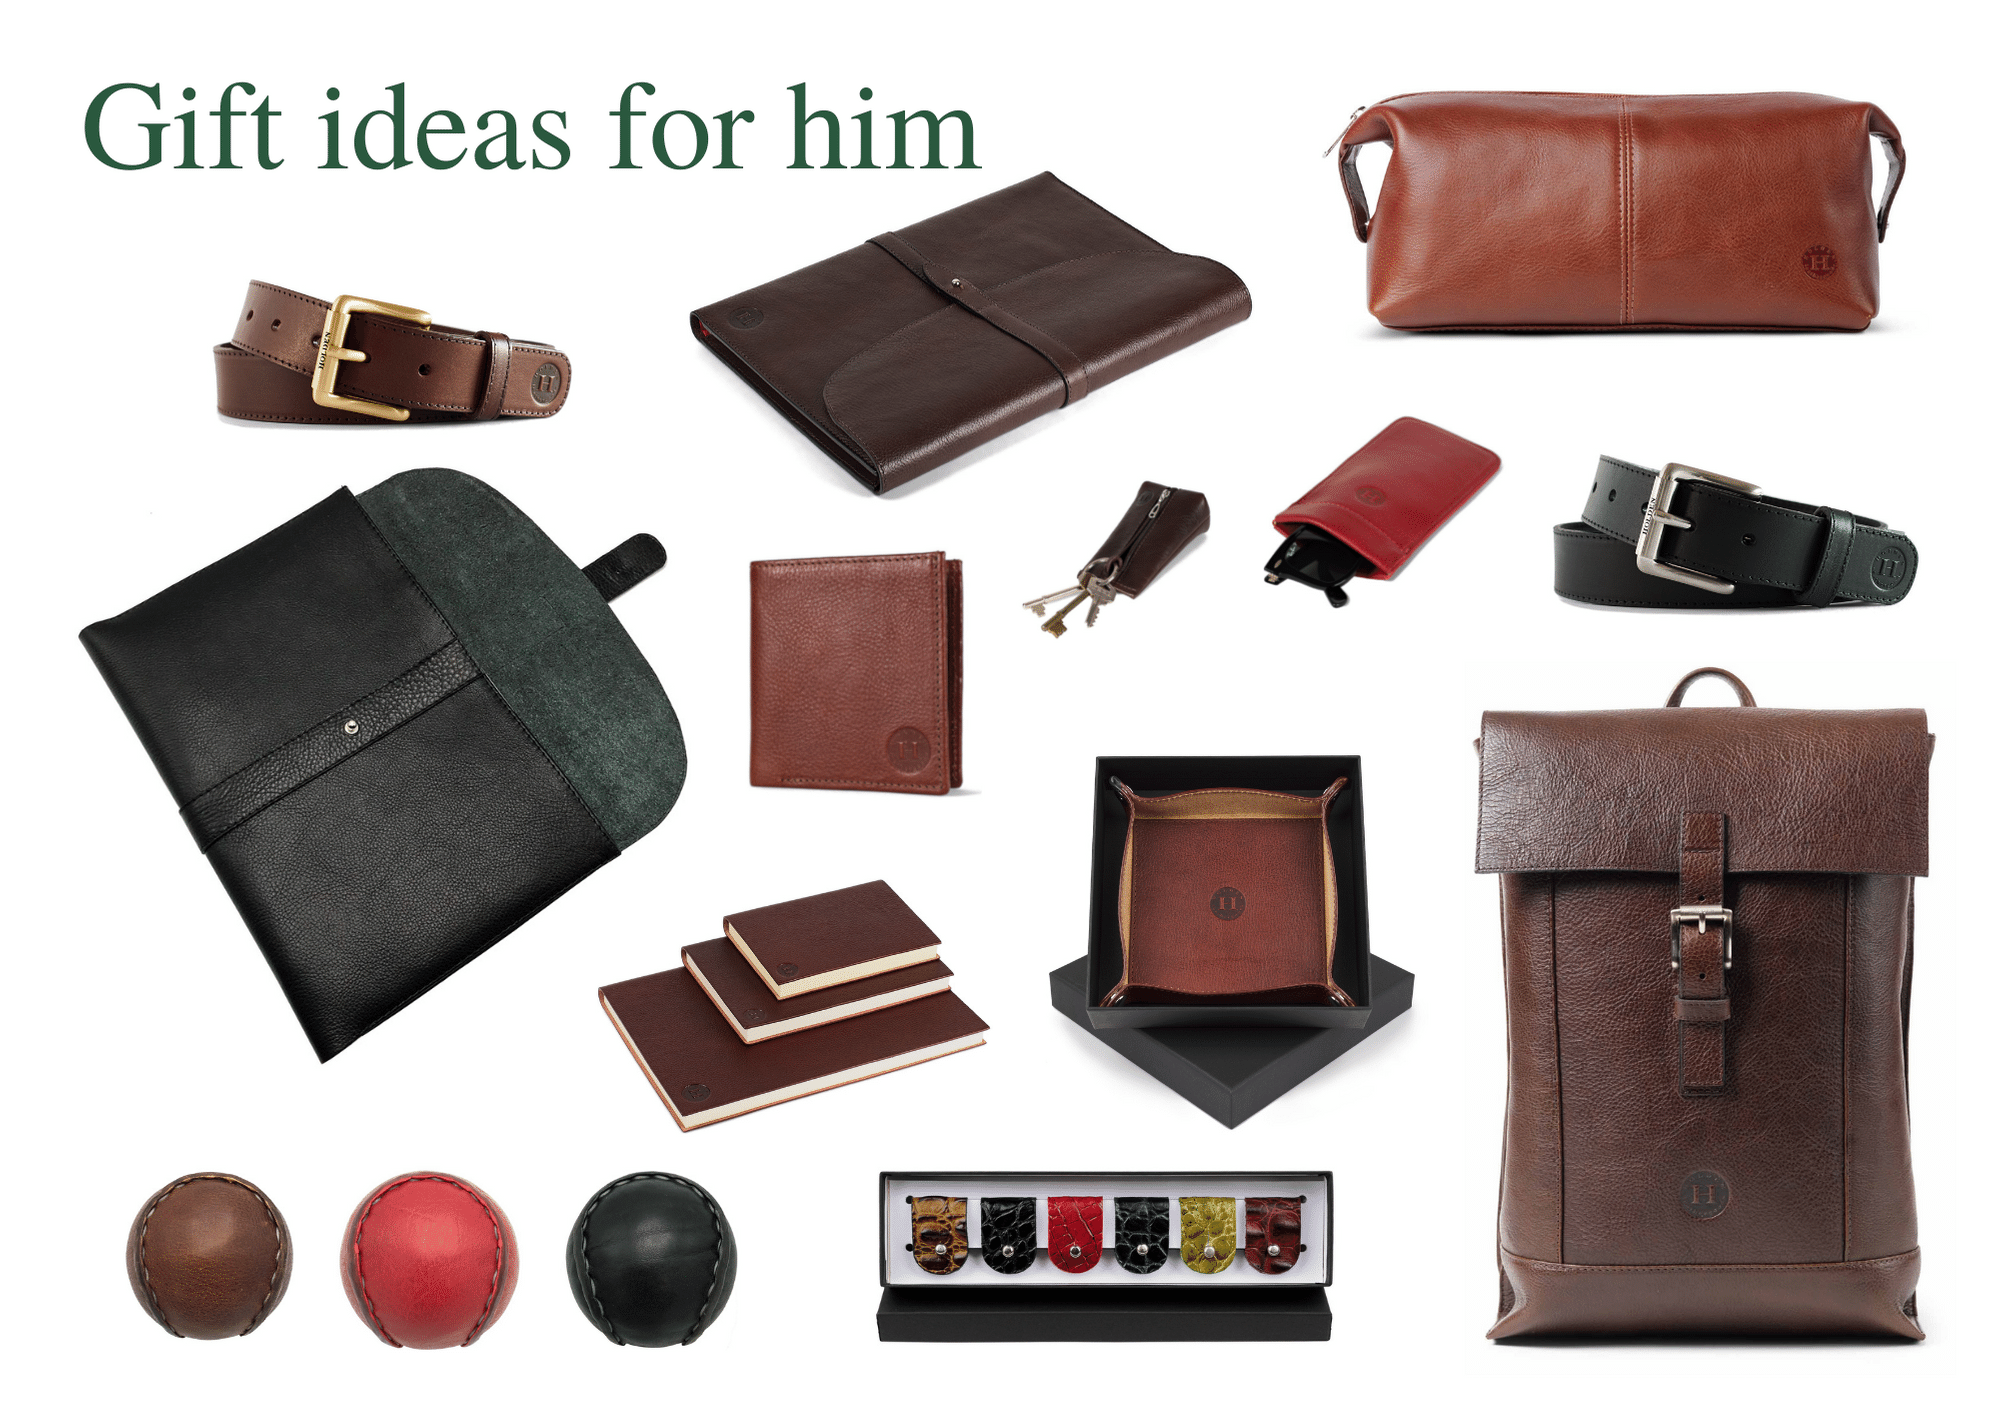 Leathergoods gift ideas for men, for Father's Day